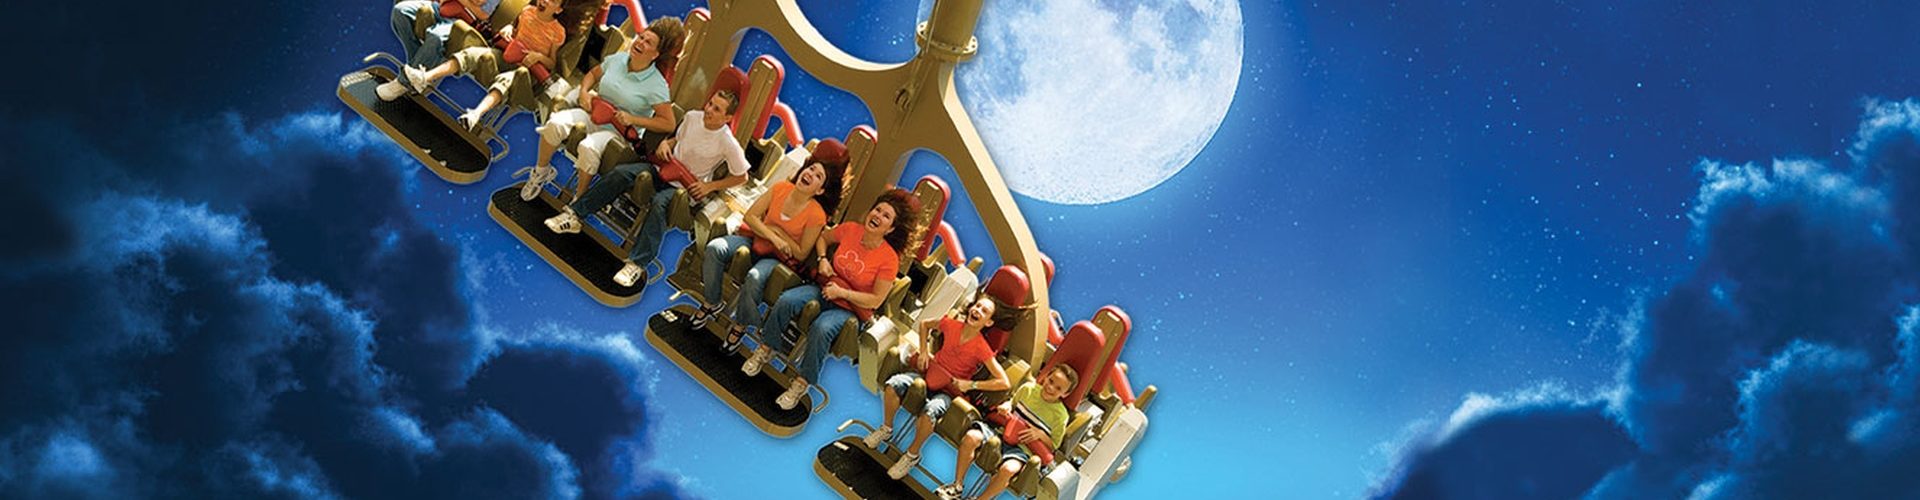 Silver Dollar City Open Late for Moonlight Madness!